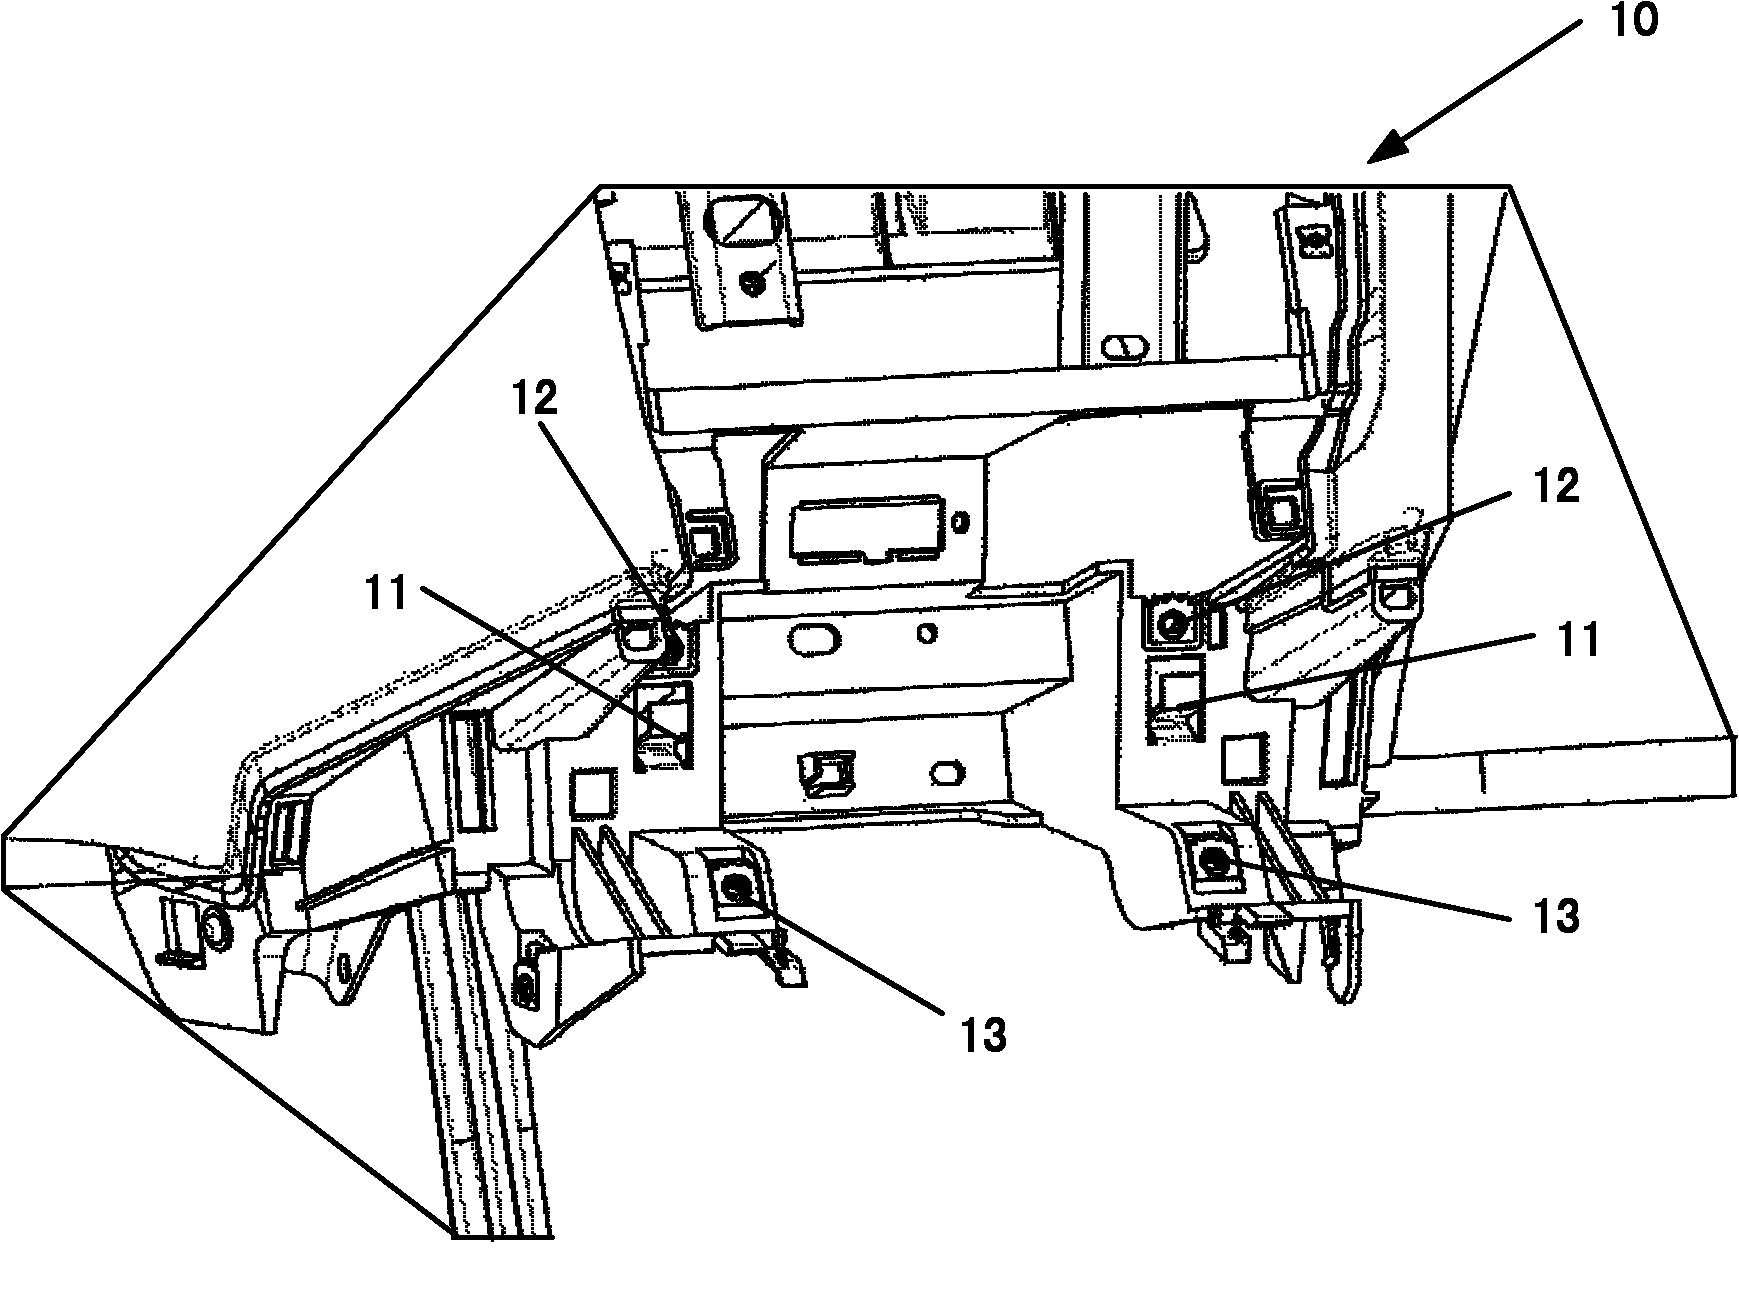 Device and method of flexible installation for installing vehicle main dashboard and vice-dashboard